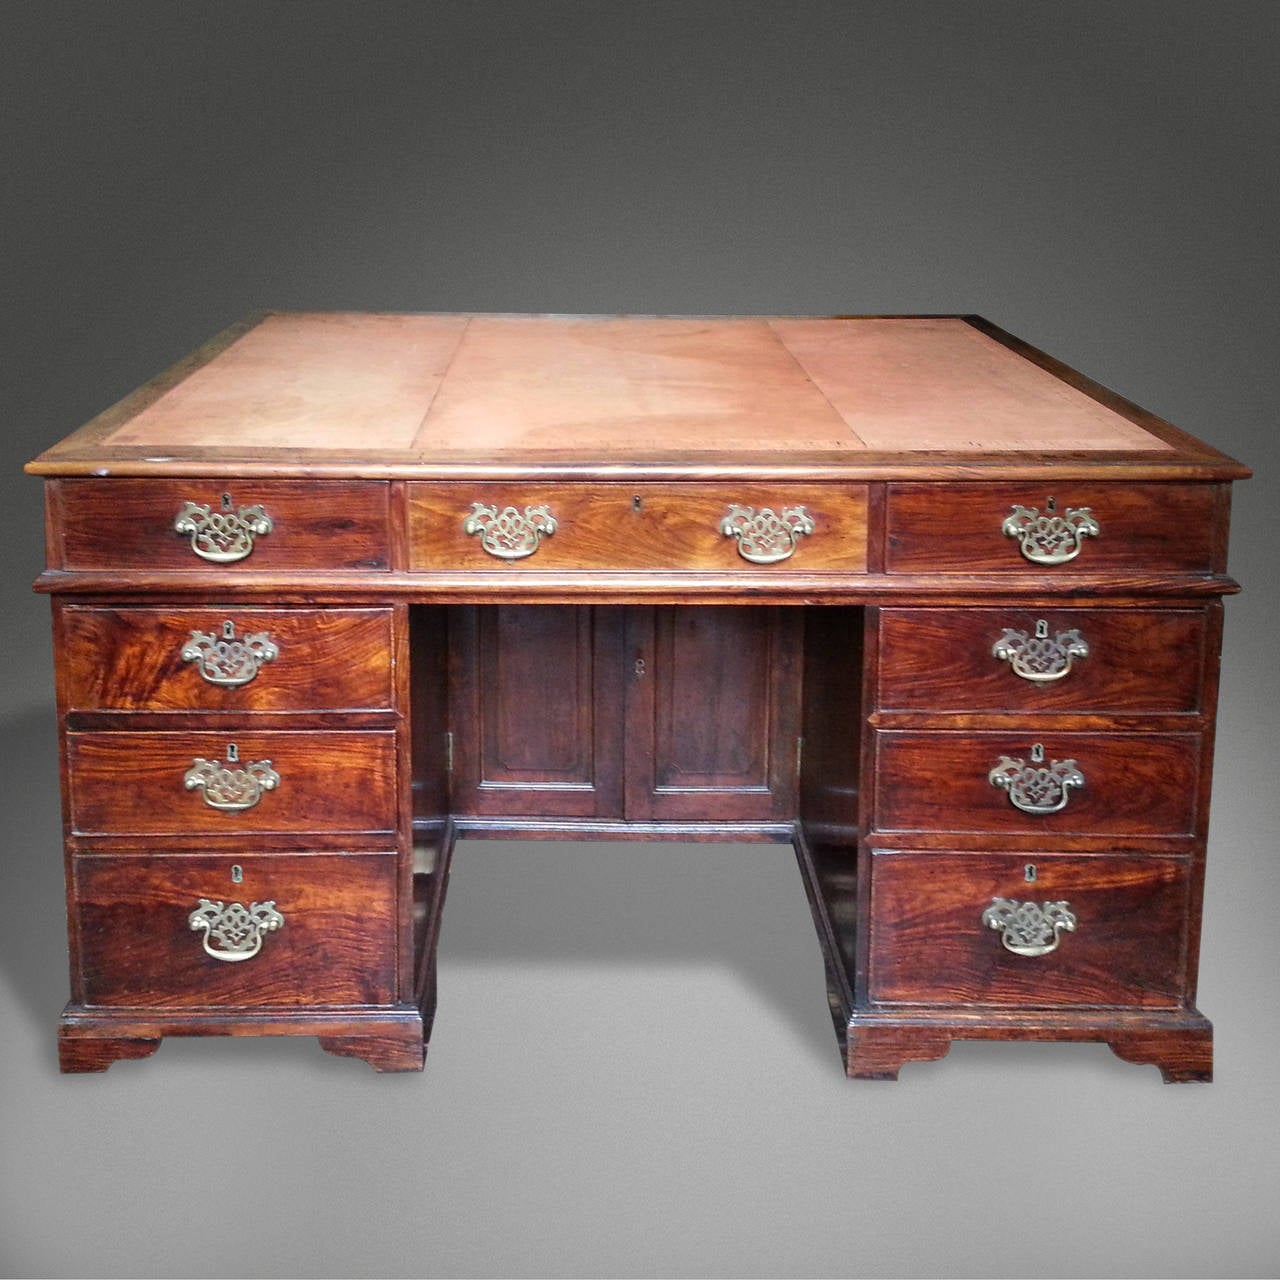 A Very Rare Mid-18th Century Huanghuali Wood Chinese Desk in the English Taste

In Huang Hua Li wood.